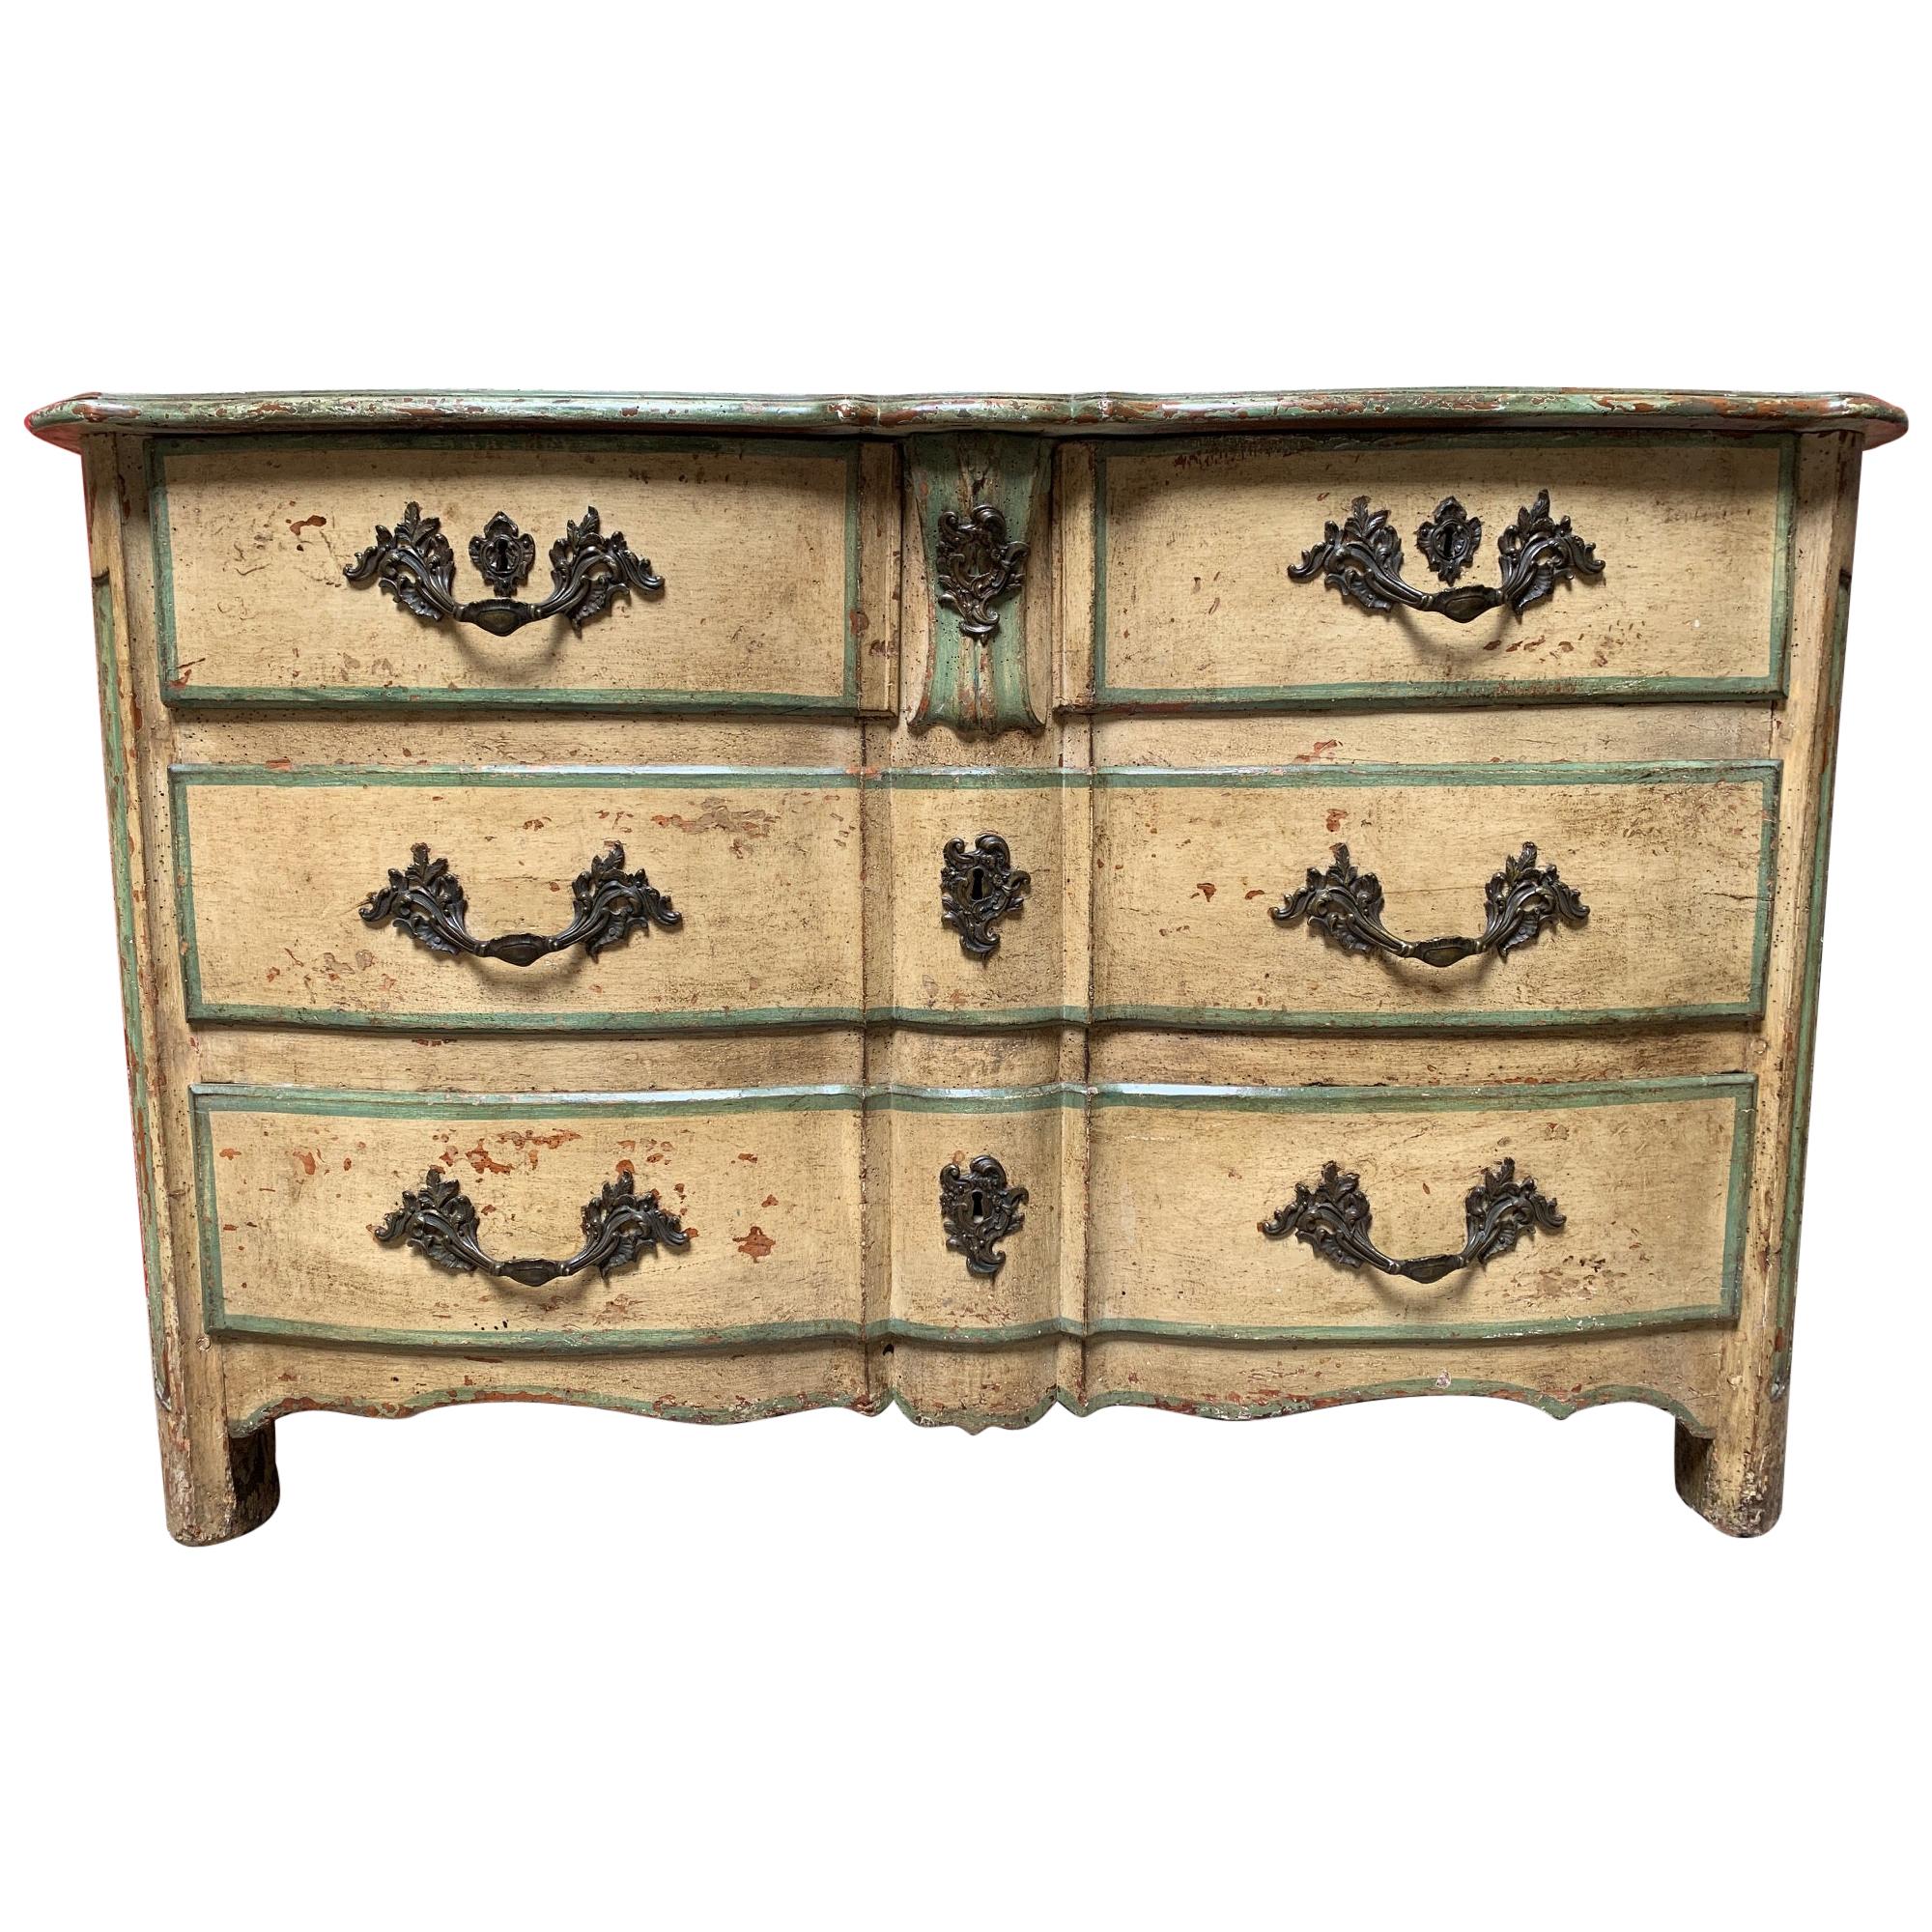 18th Century French Regence Commode with a Painted Finish